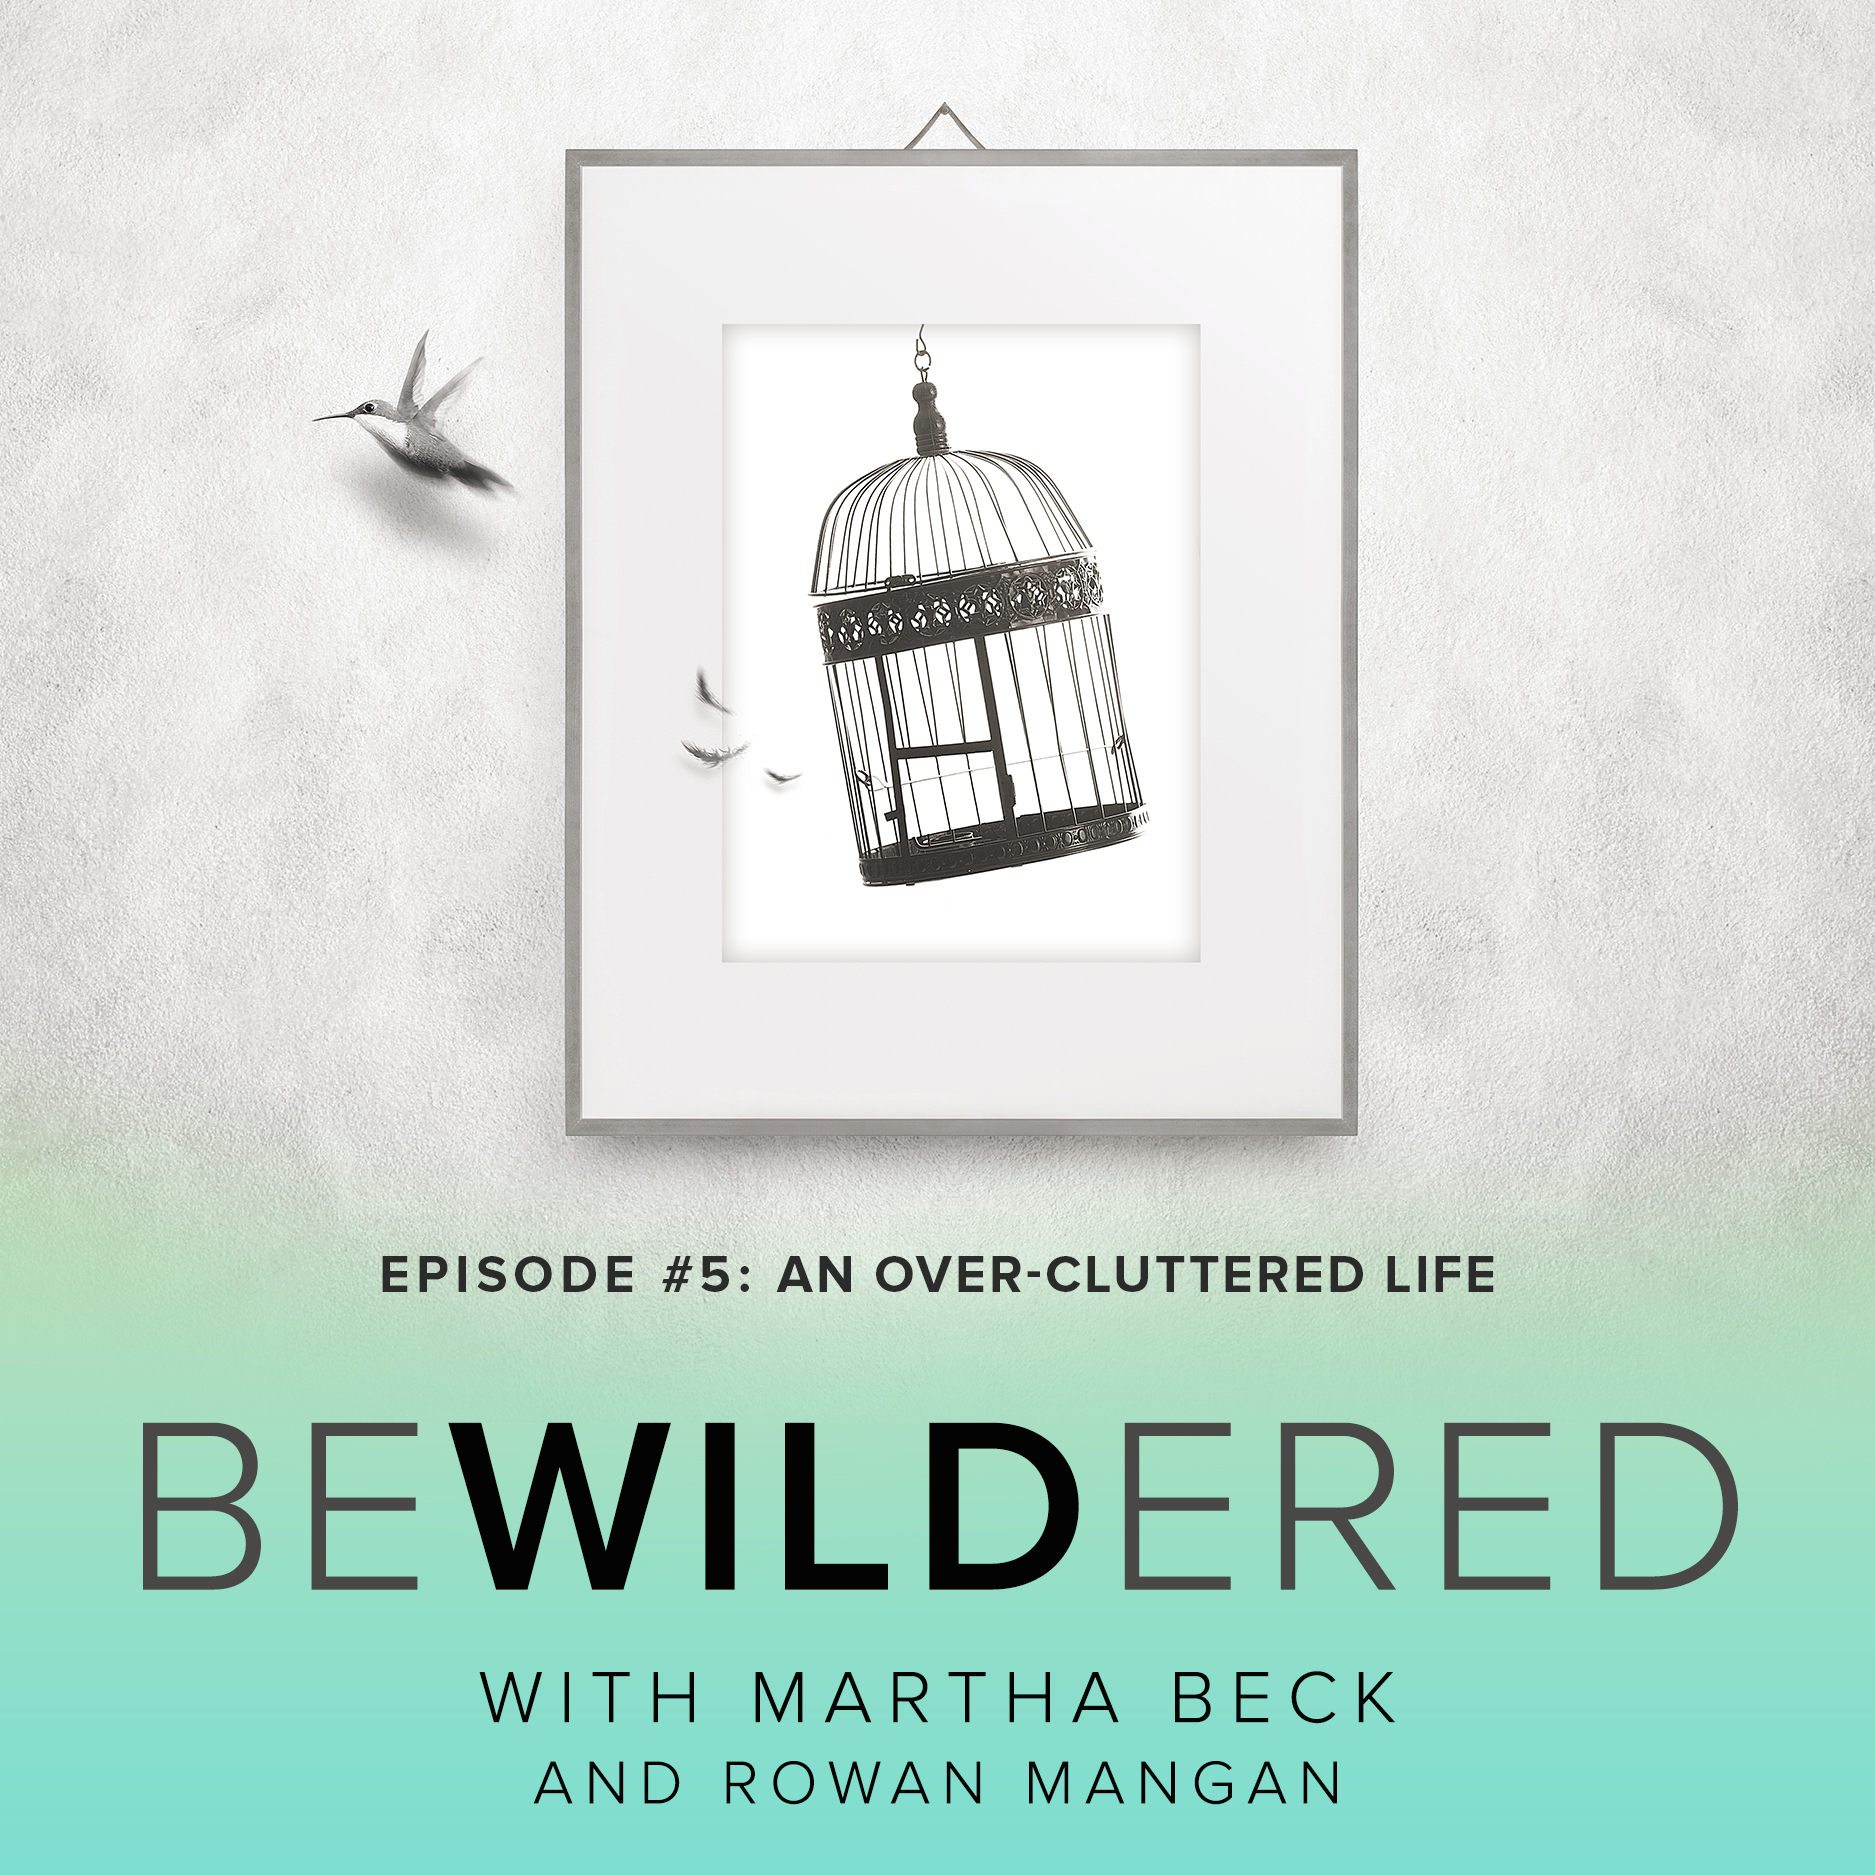 Image for Episode #5 An Over-Cluttered Life for the Bewildered Podcast with Martha Beck and Rowan Mangan